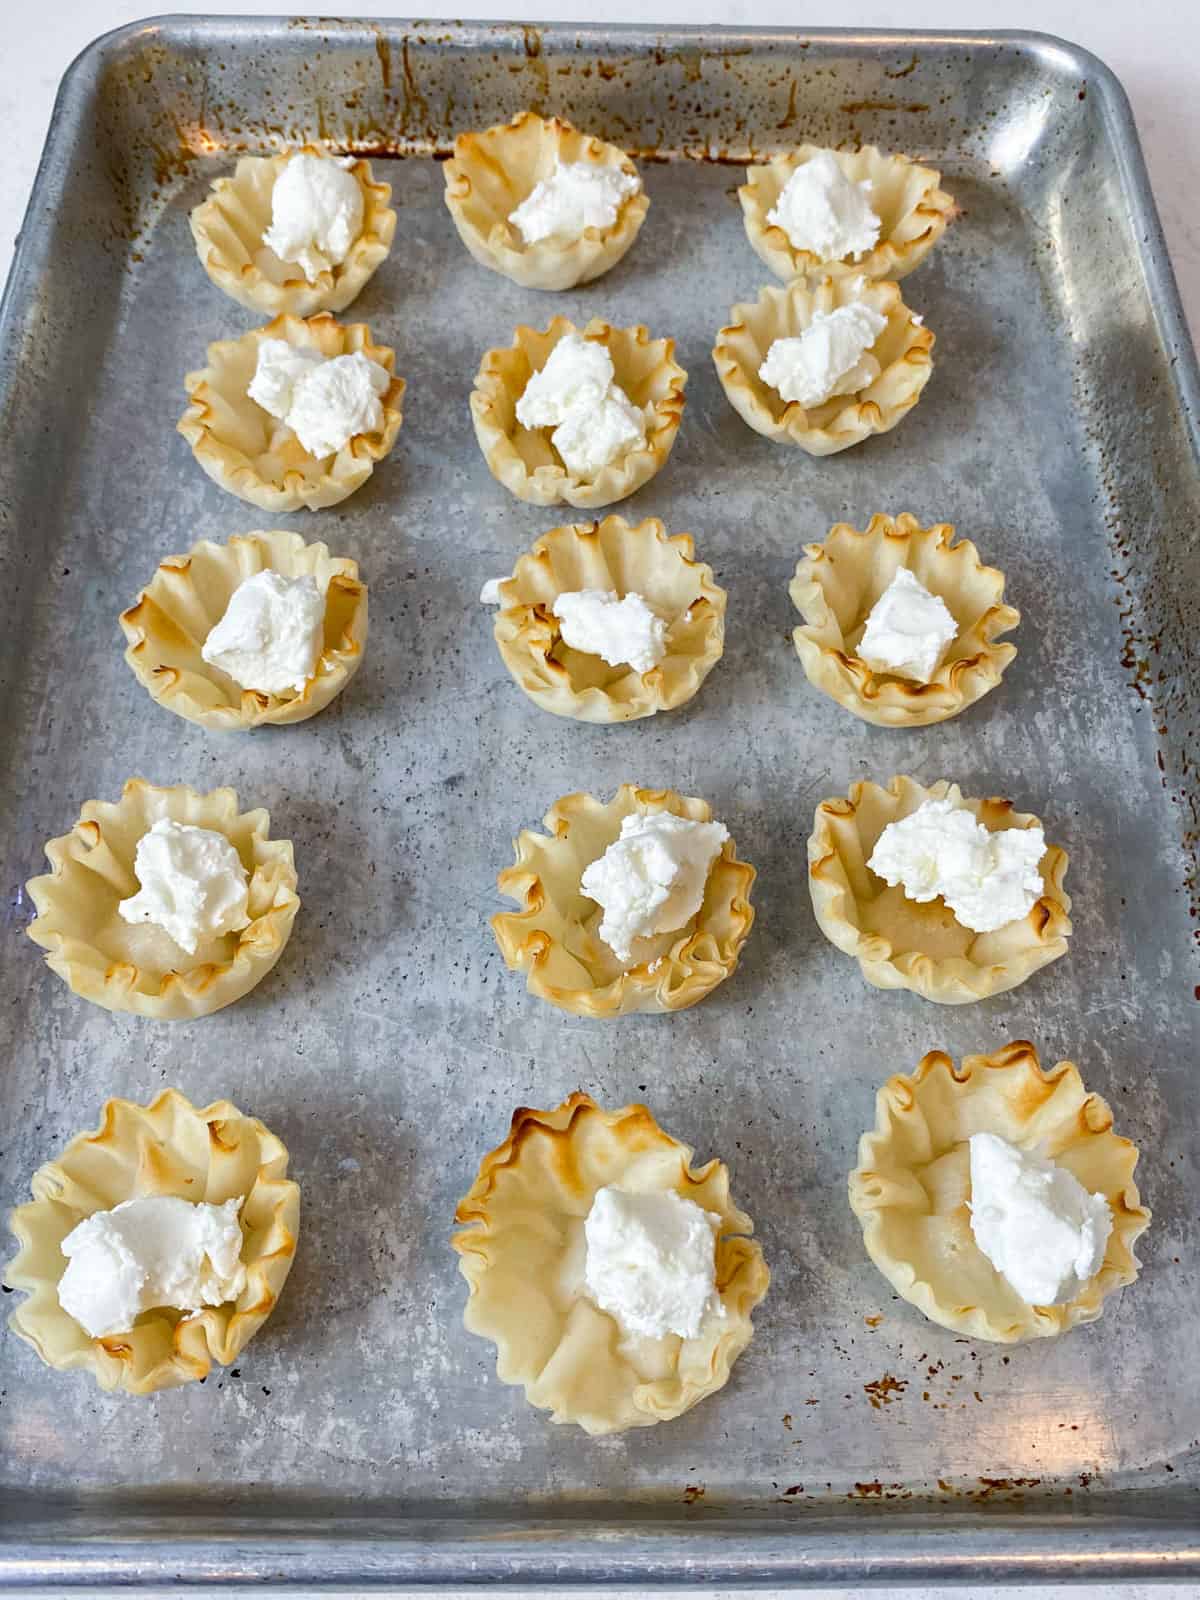 Add crumbled goat cheese to phyllo cups.